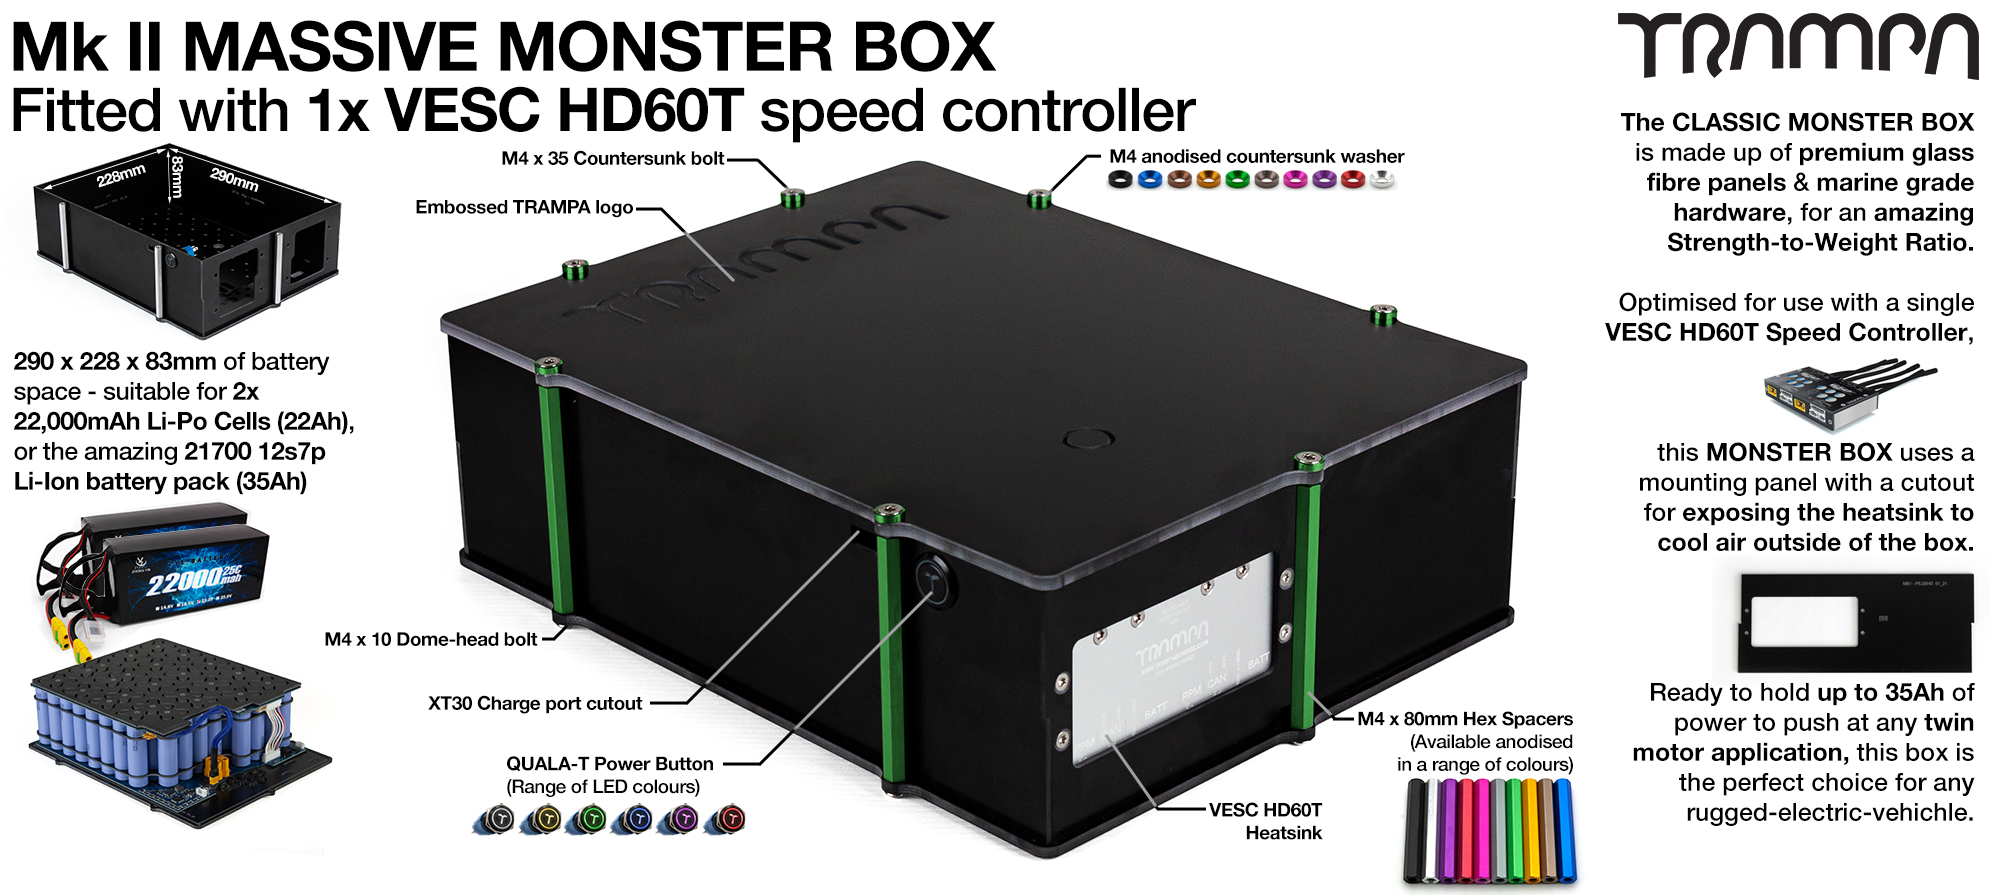 21700 2WD Mk II MASSIVE MONSTER Box with 1x VESC HD-60Twin Fitted 